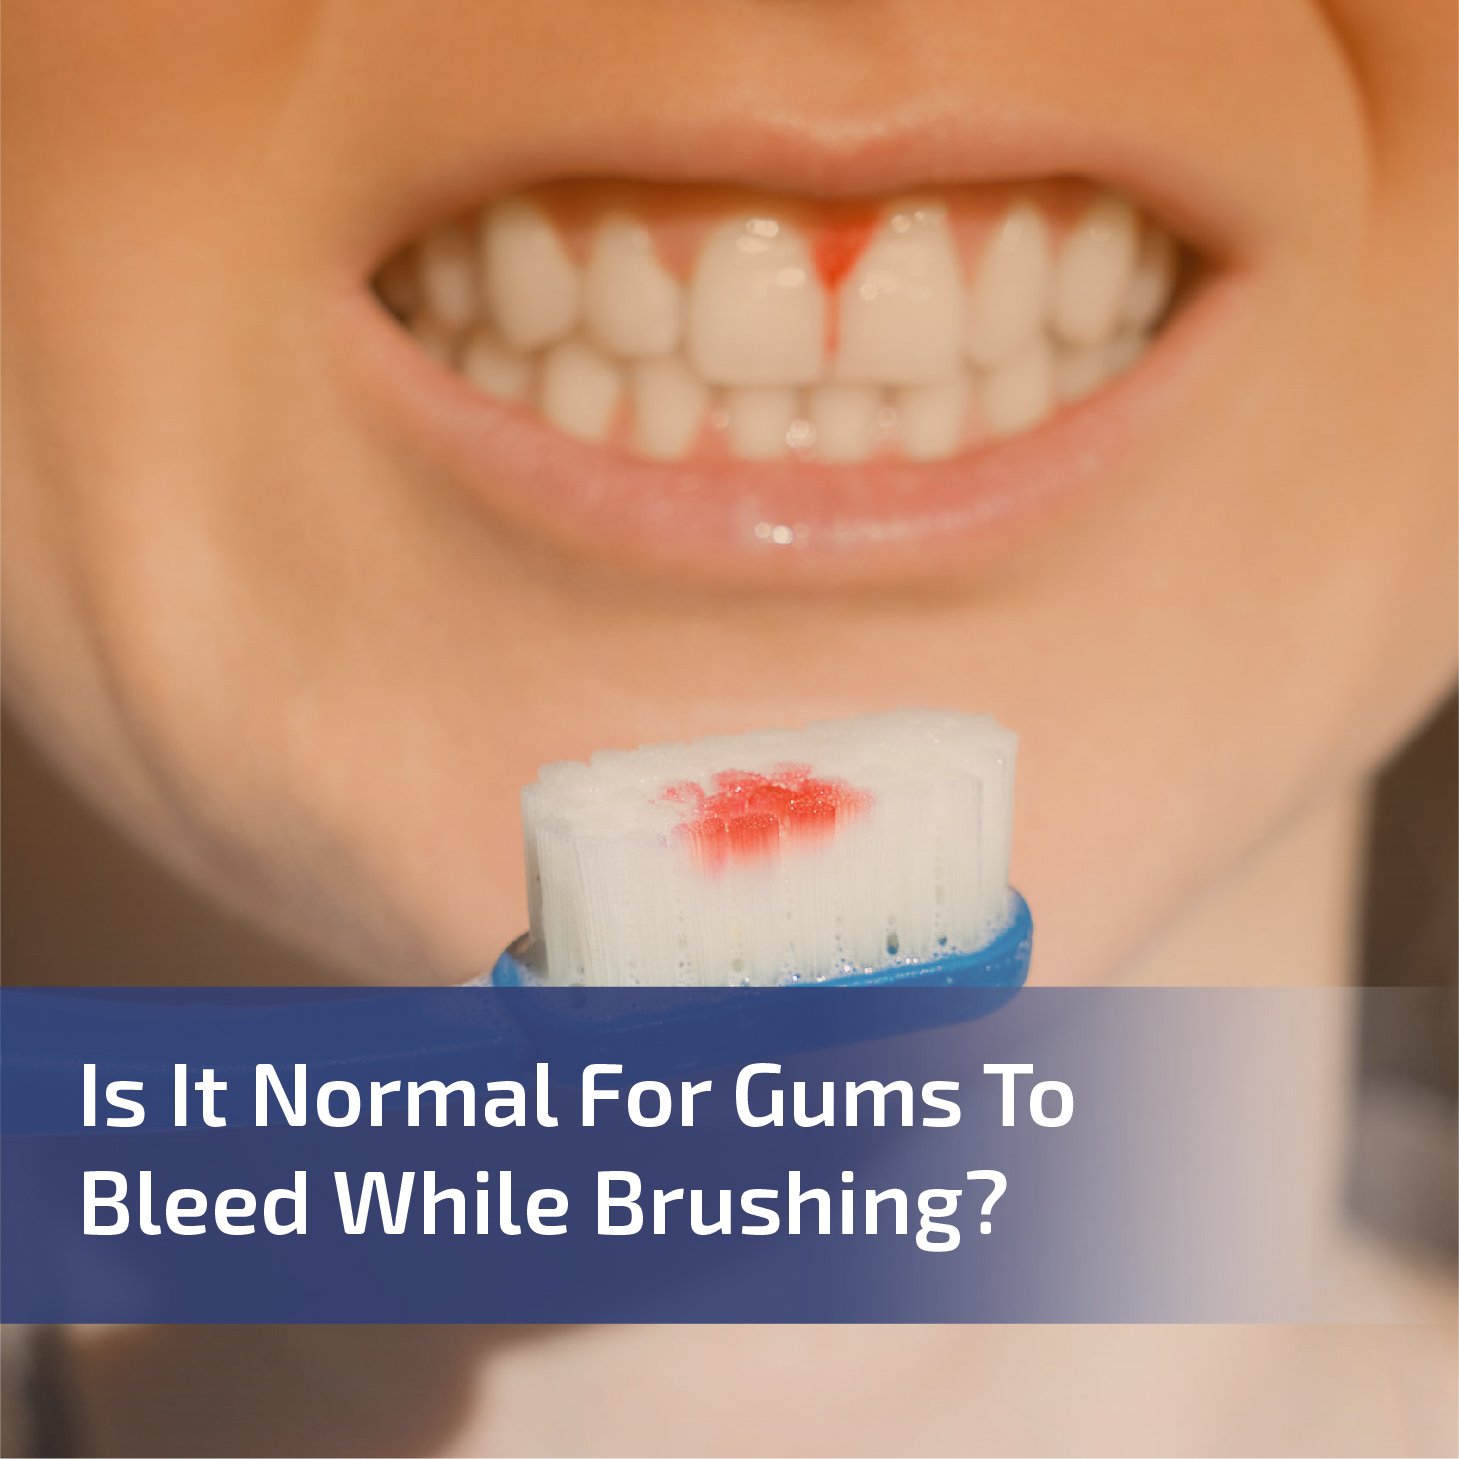 Is It Normal for Gums to Bleed While Brushing?